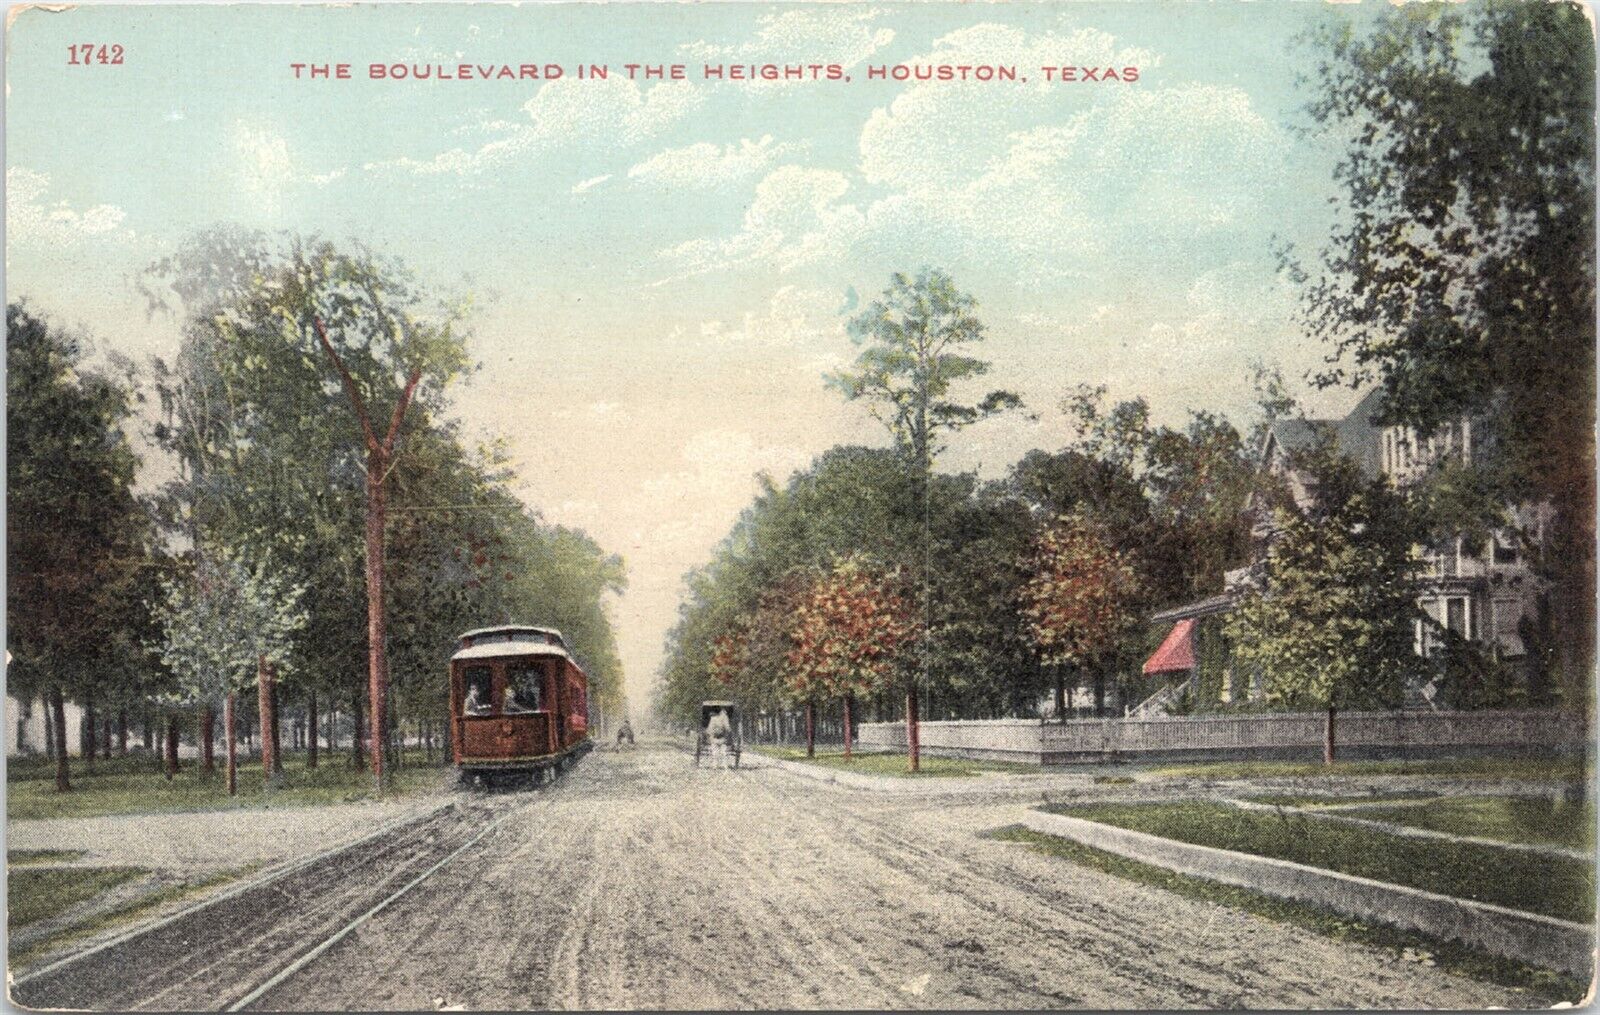 Houston TX The Boulevard in the Heights - Trolley 